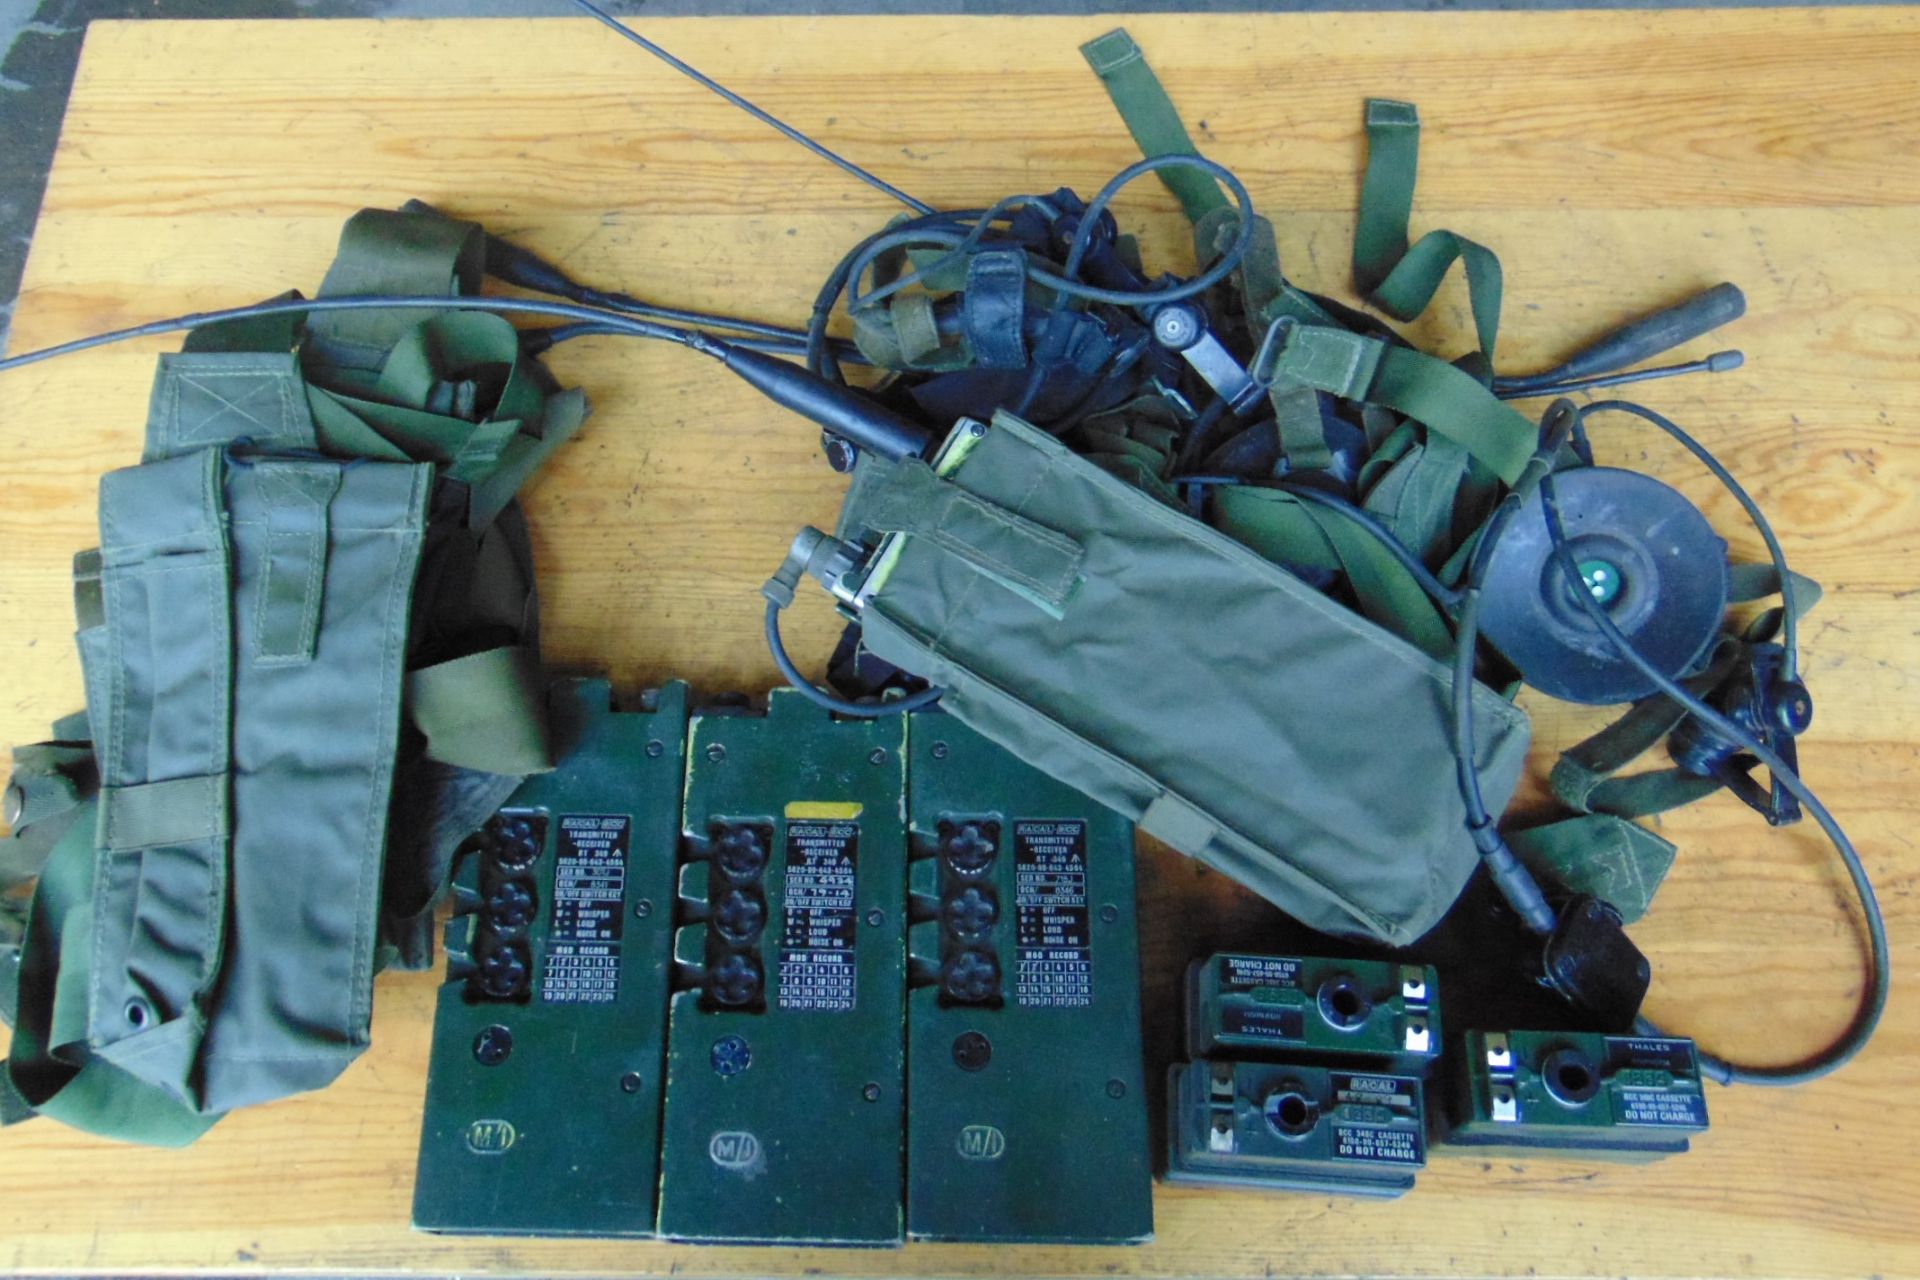 4 x UK / RT 349 Transmitter Receiver Complete as shown - Image 2 of 6